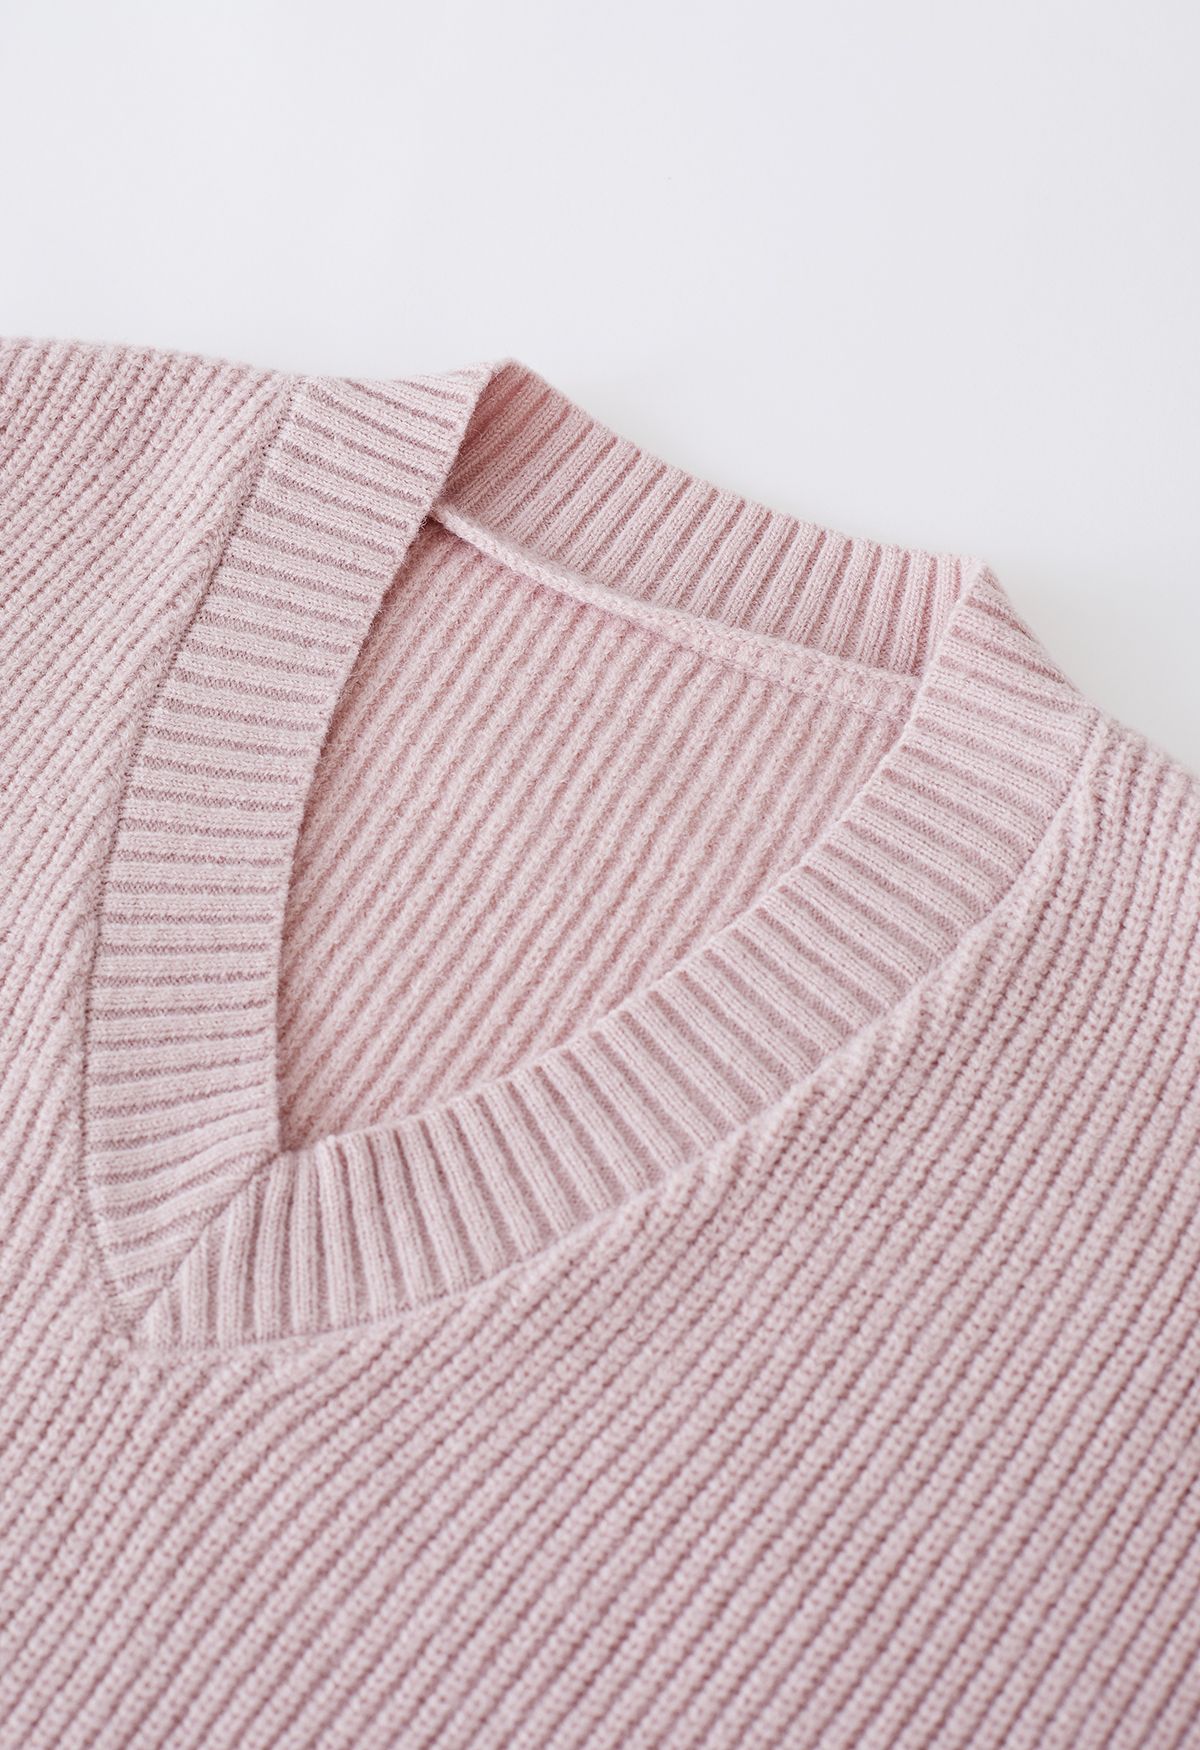 Detachable Scarf Rib Knit Sweater in Dusty Pink